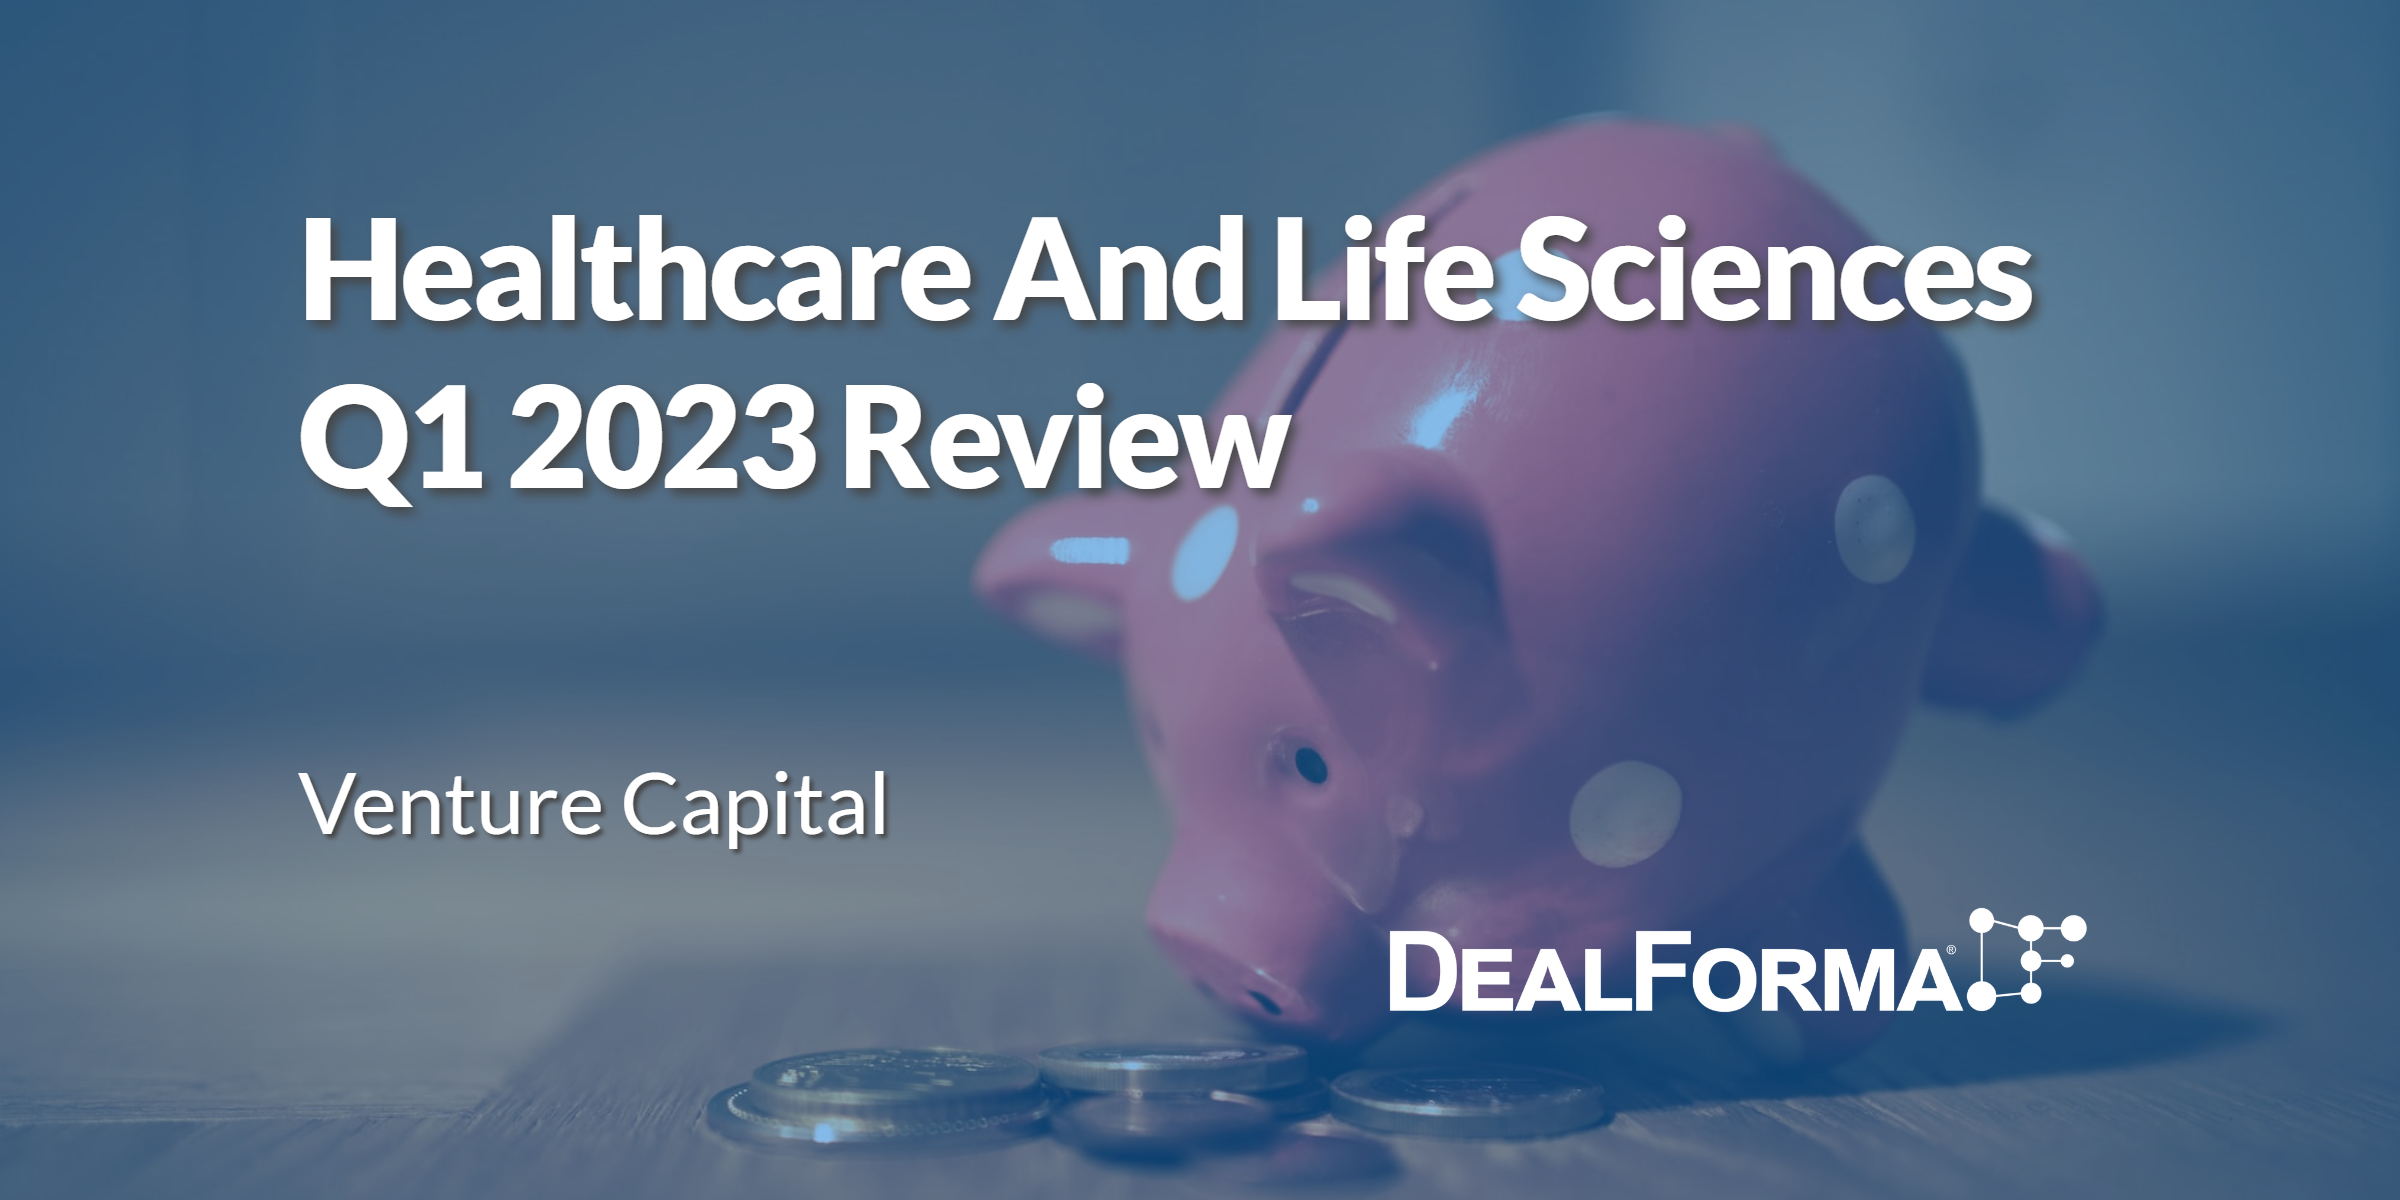 Healthcare And Life Sciences Q1 2023 Review: Venture Capital